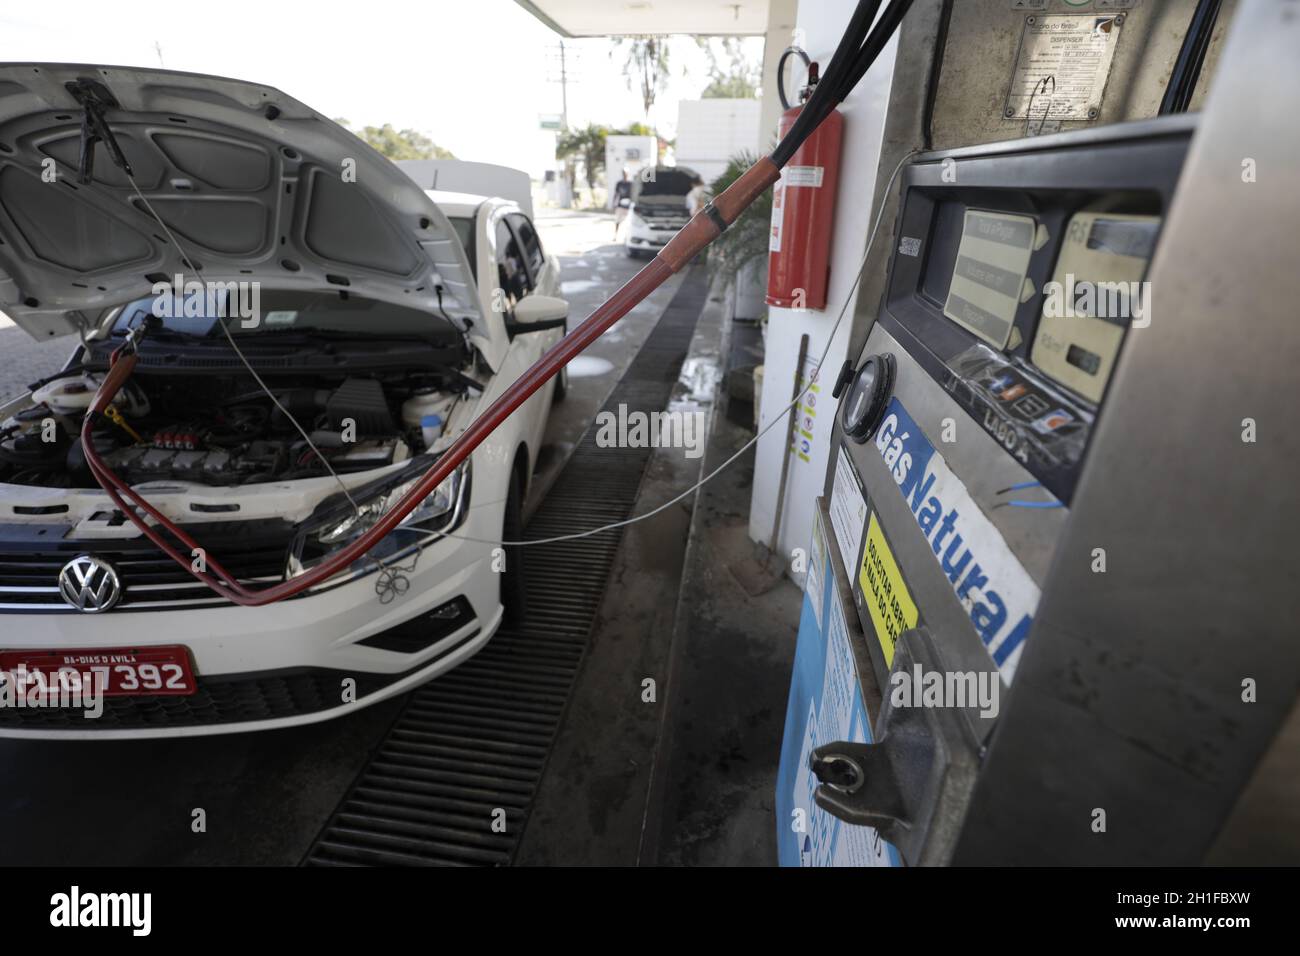 camacari, bahia / brazil - november 22, 2018: Vehicle is seen during filling with vehicular natural gas - CNG - at a gas station in the municipality o Stock Photo